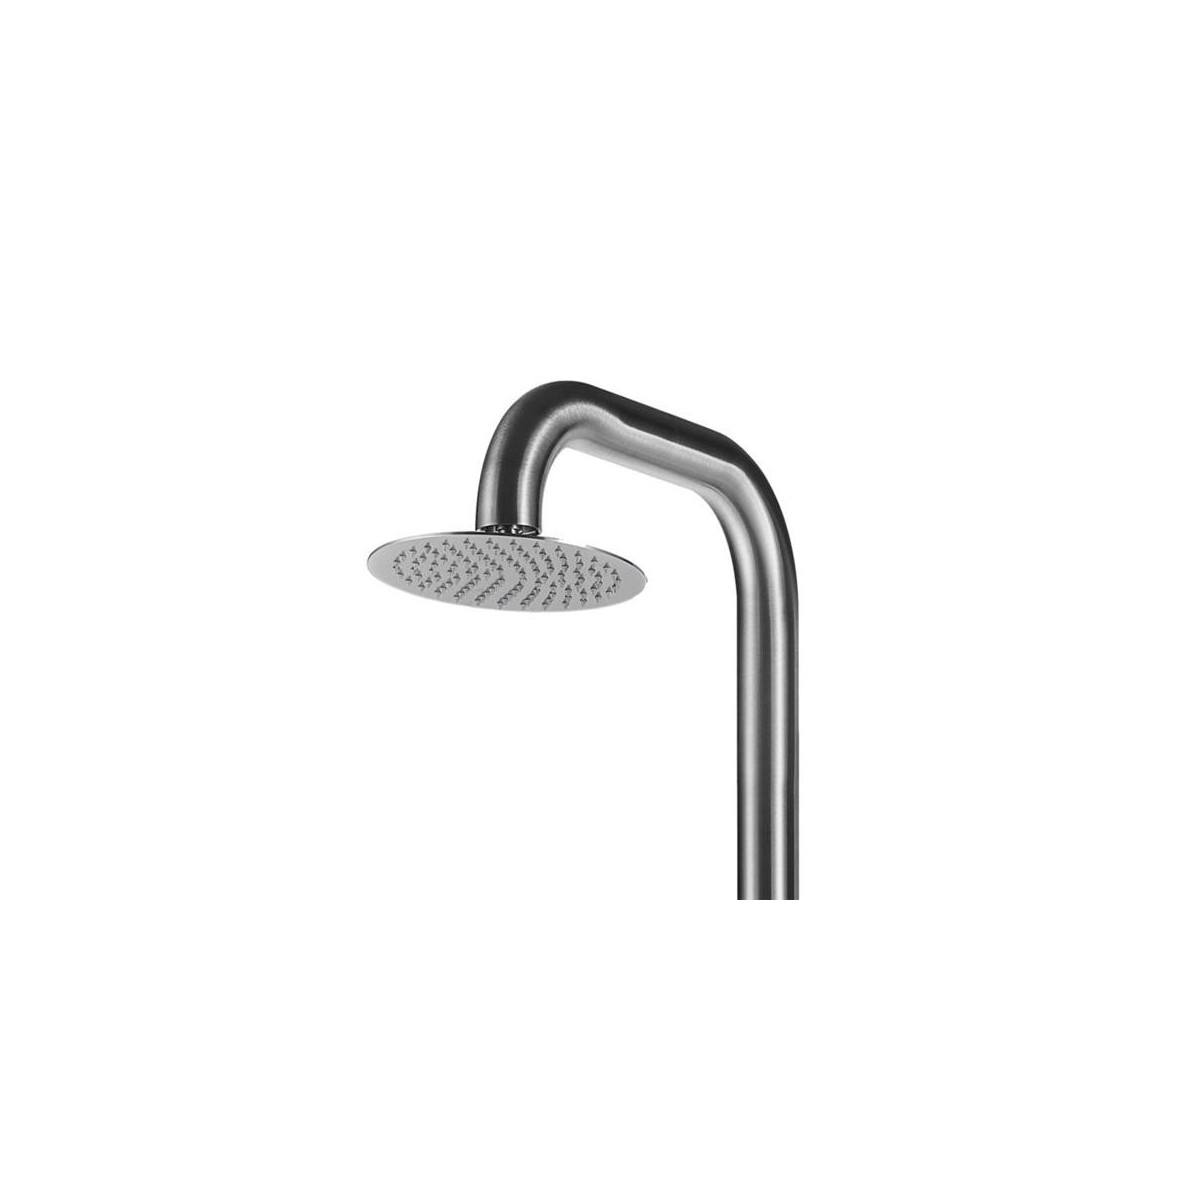 BuyOutdoor shower Pula in stain stainless AISI 316 with shower diameter 25cm and hand shower